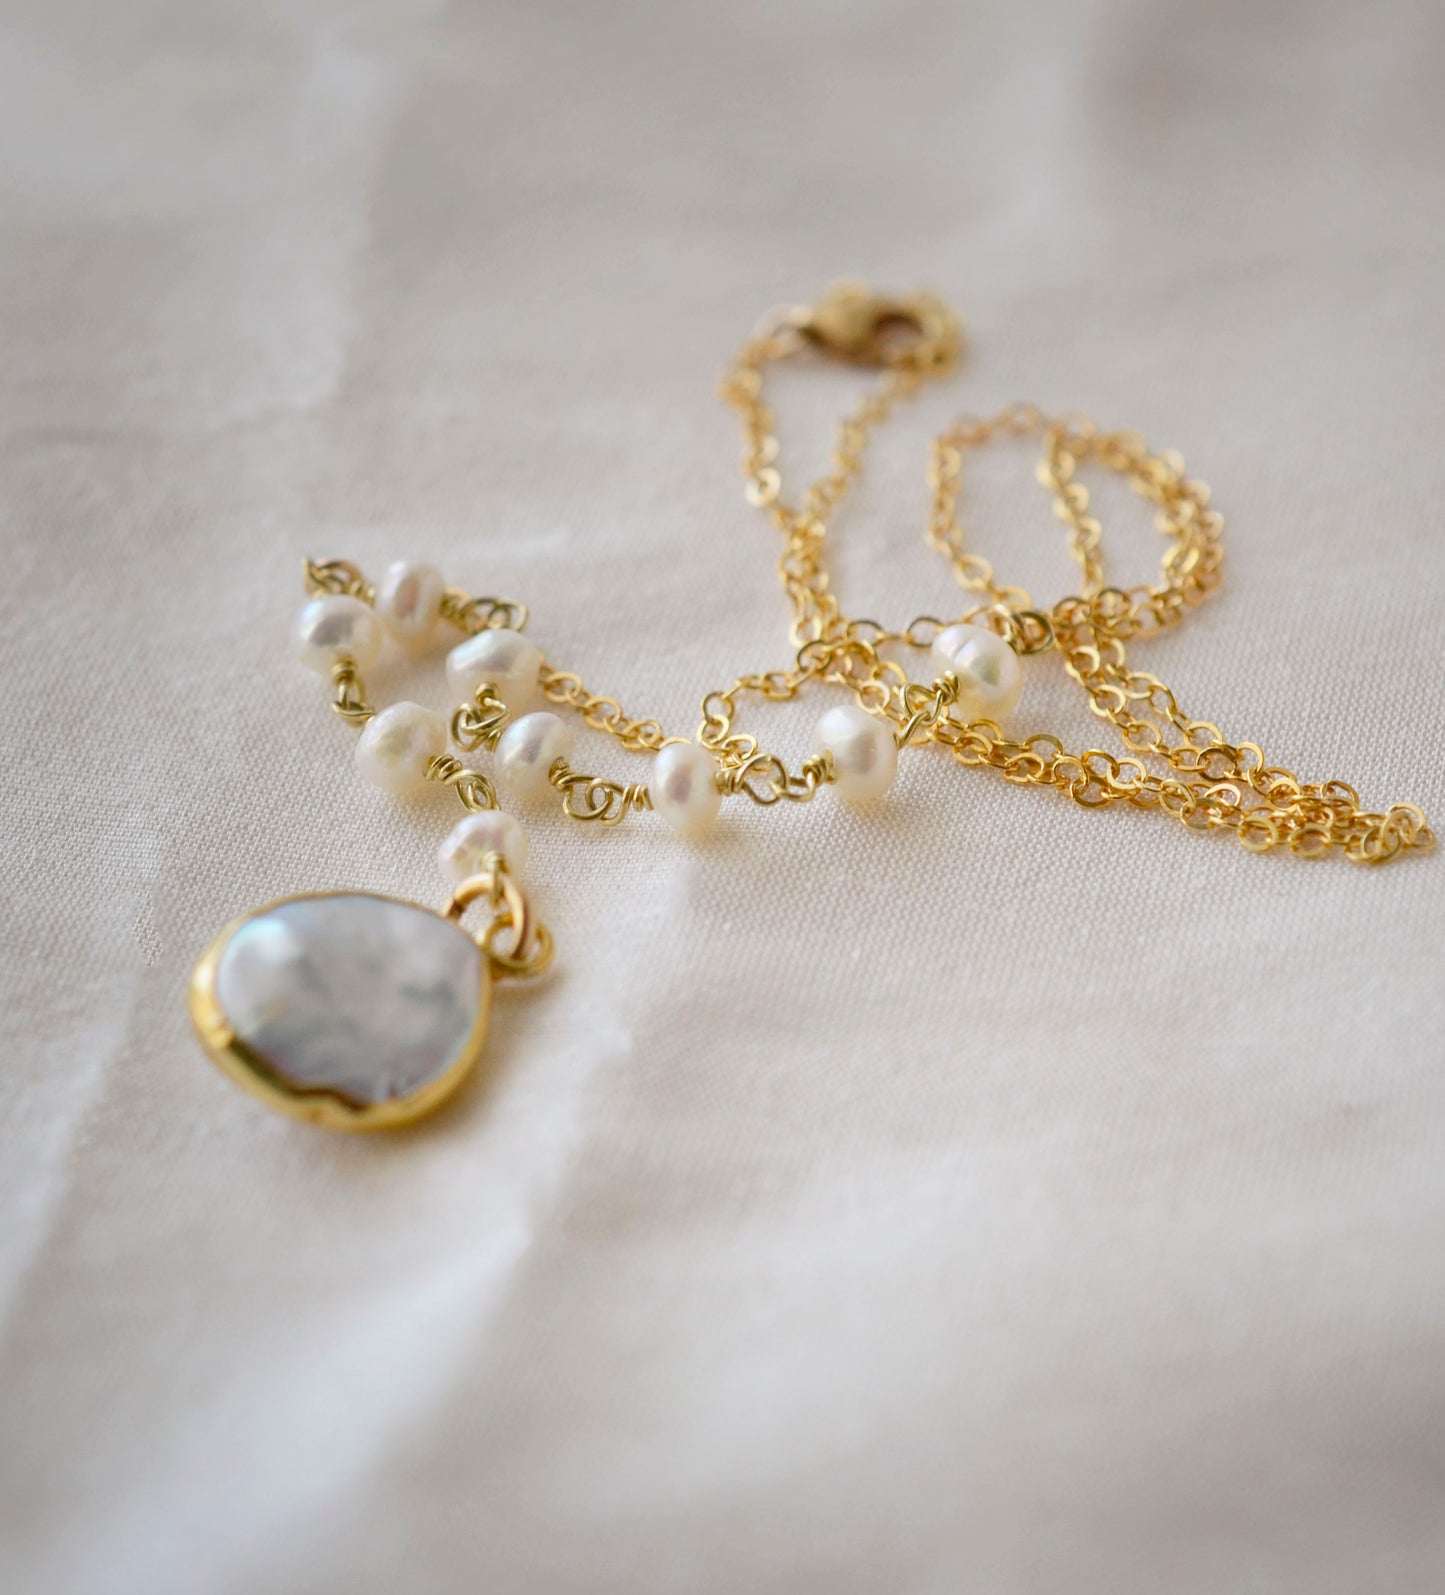 Wandering Pearls, White Freshwater Pearl Necklace in Gold Filled